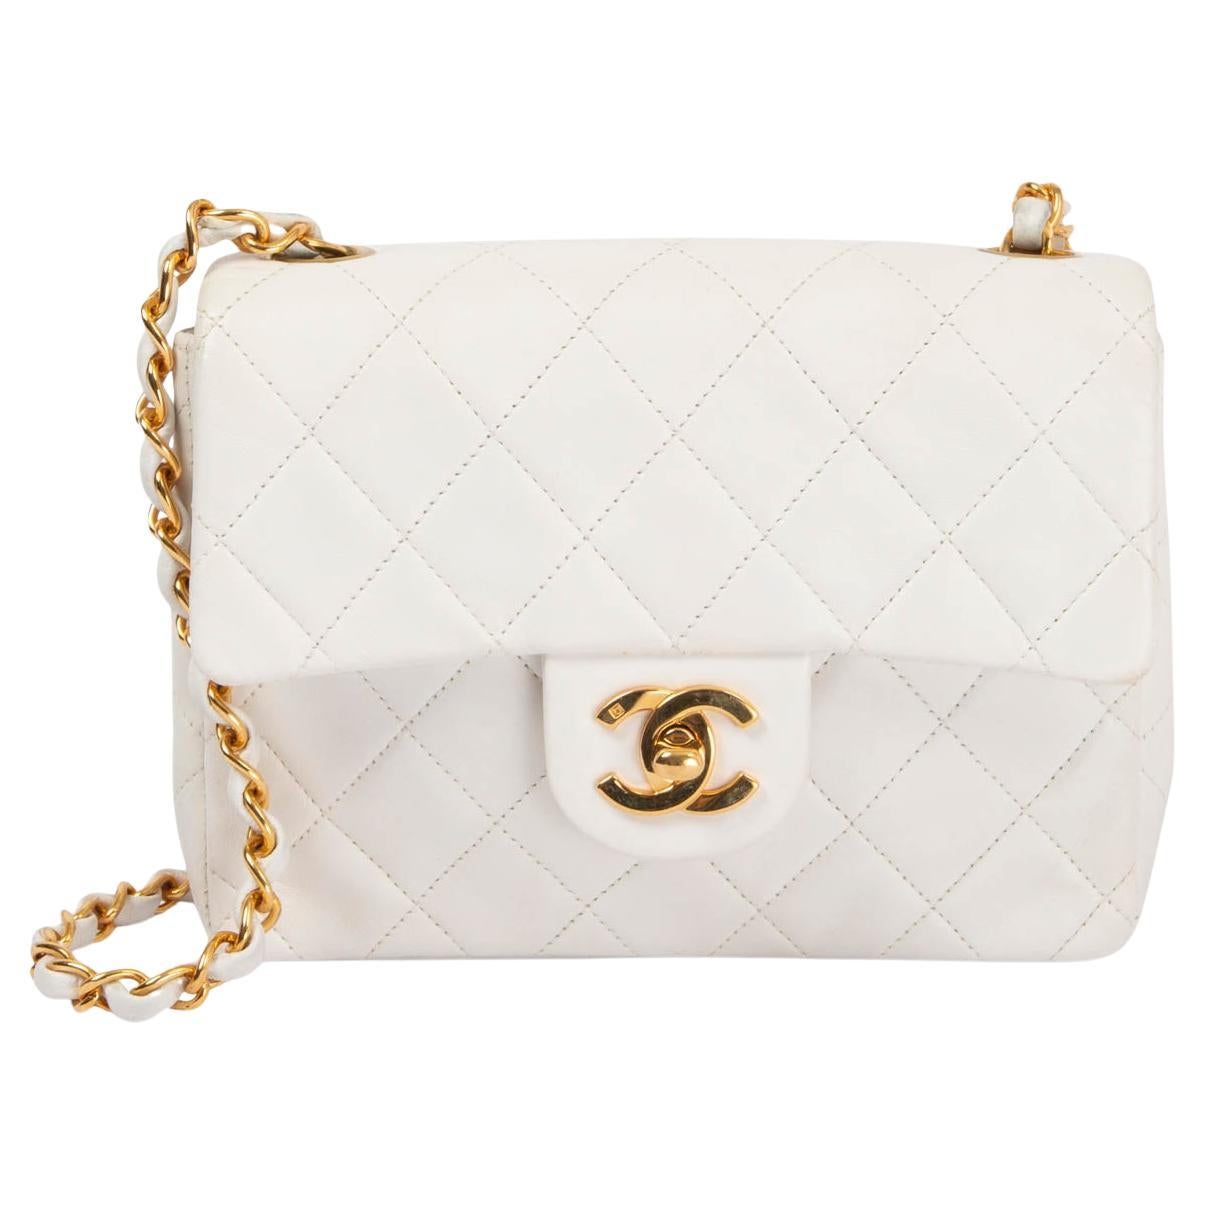 CHANEL white quilted leather 1997-1999 MINI SQUARE FLAP Shoulder Bag